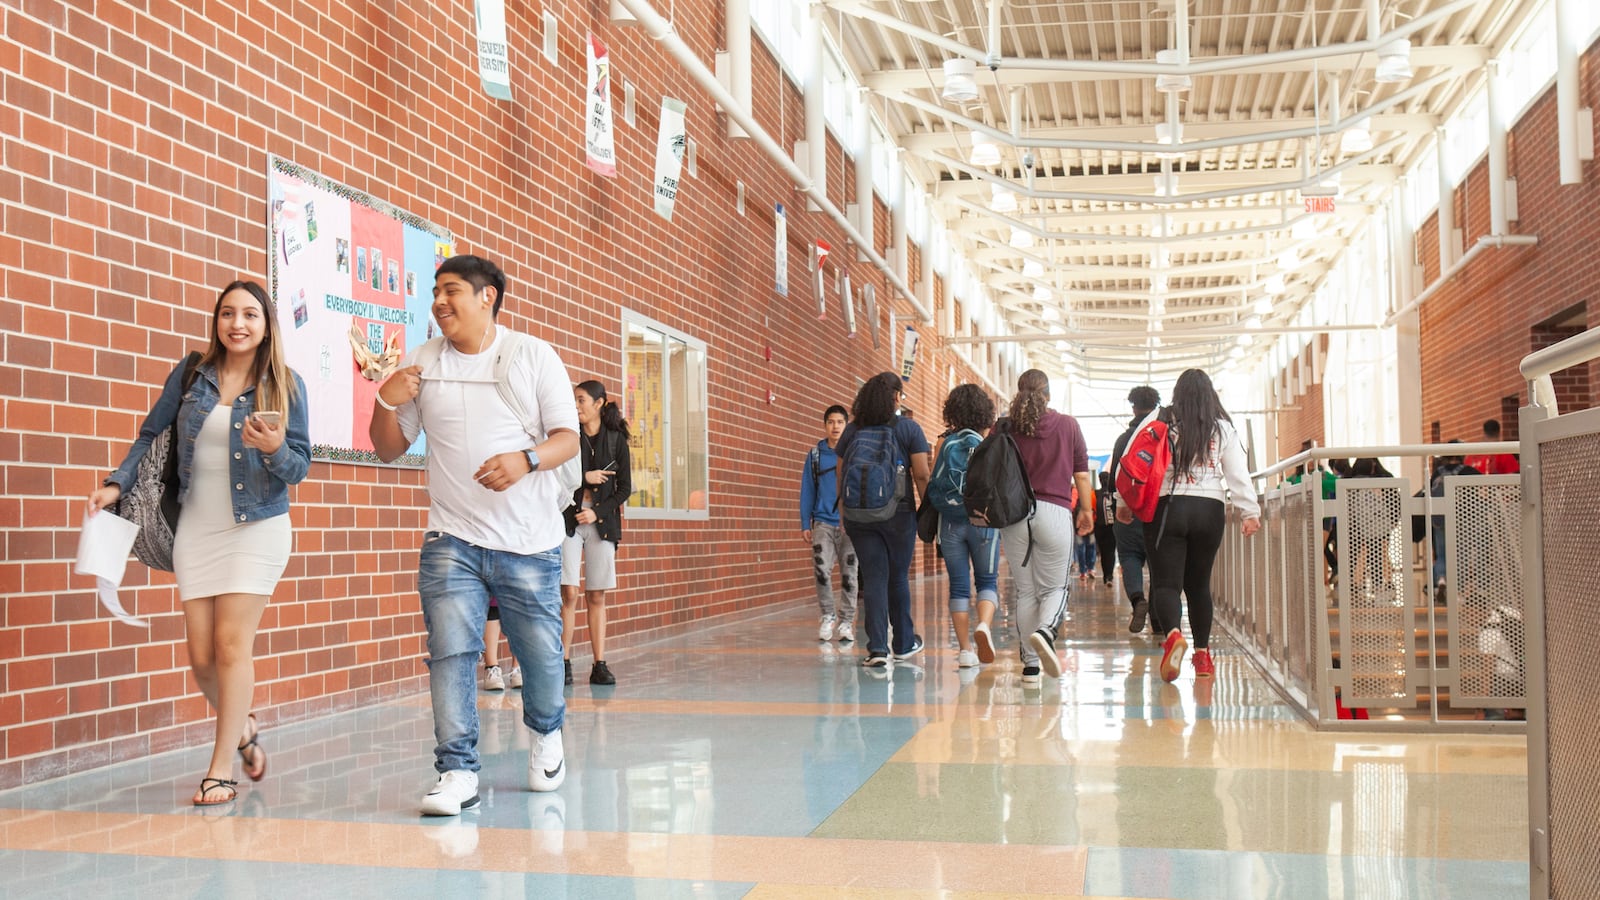 Students walk in a hallway at a school. There is a red brick wall on the left with a high ceiling and light shining through.